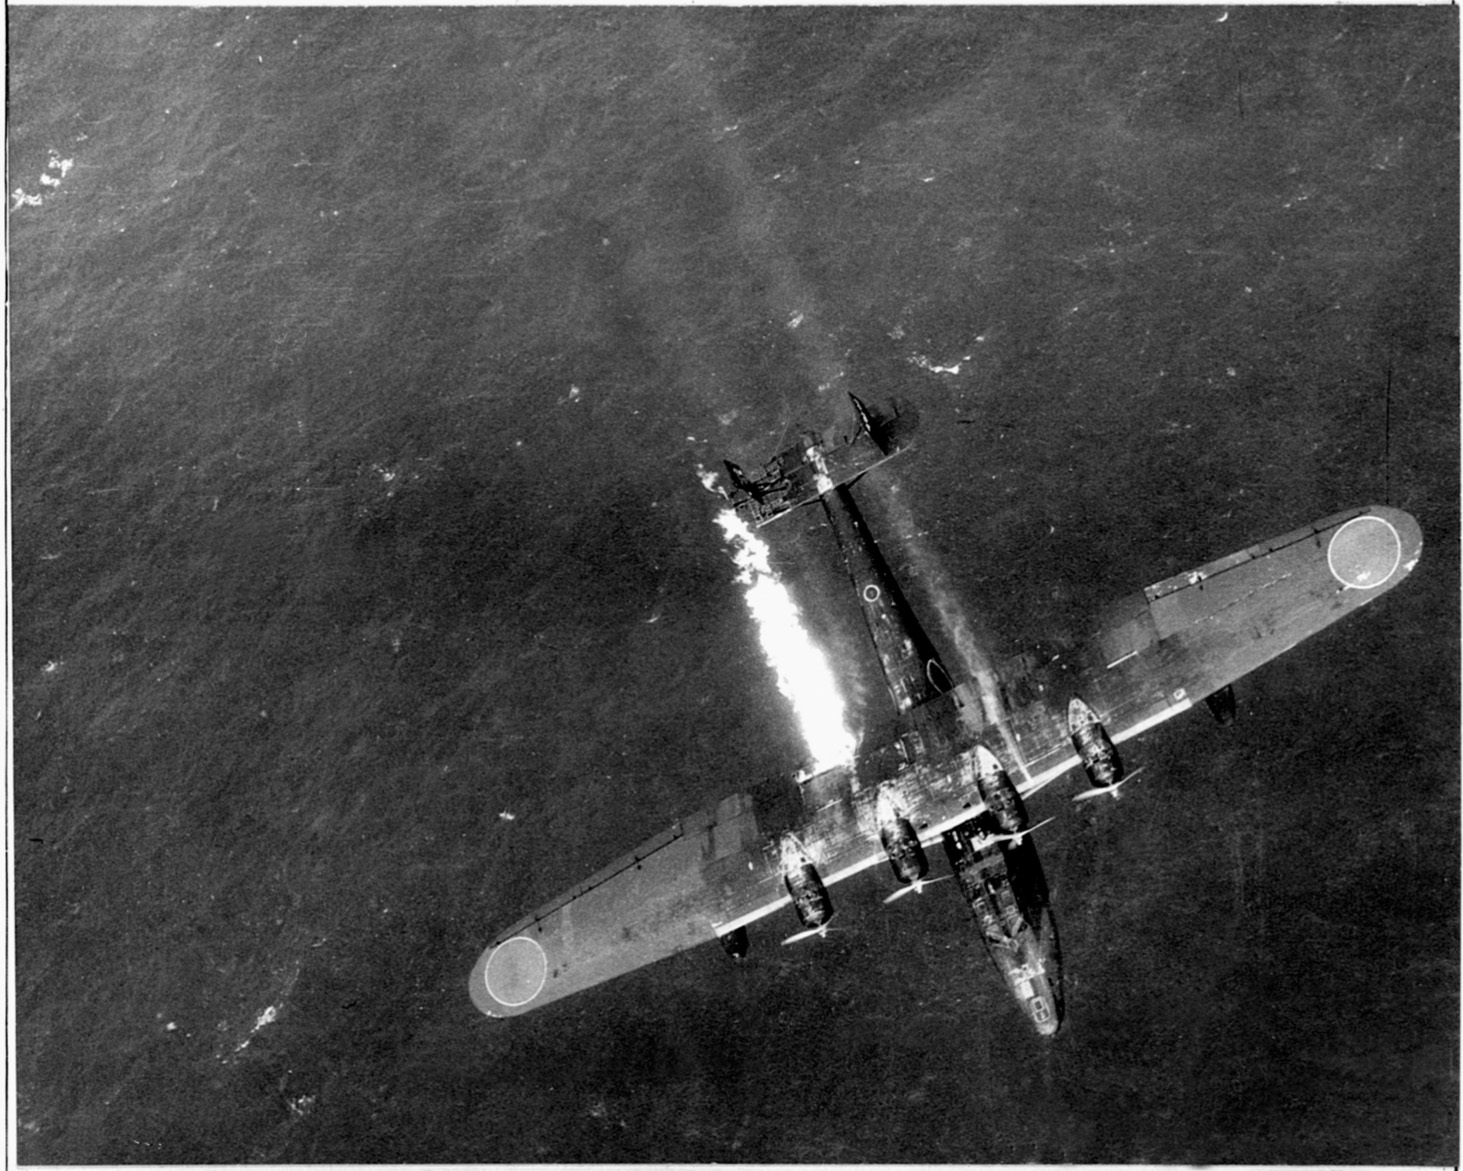 After sustaining damage from heavy fire, a Japanese flying boat—its wing trailing smoke and flames—plummets from the sky.